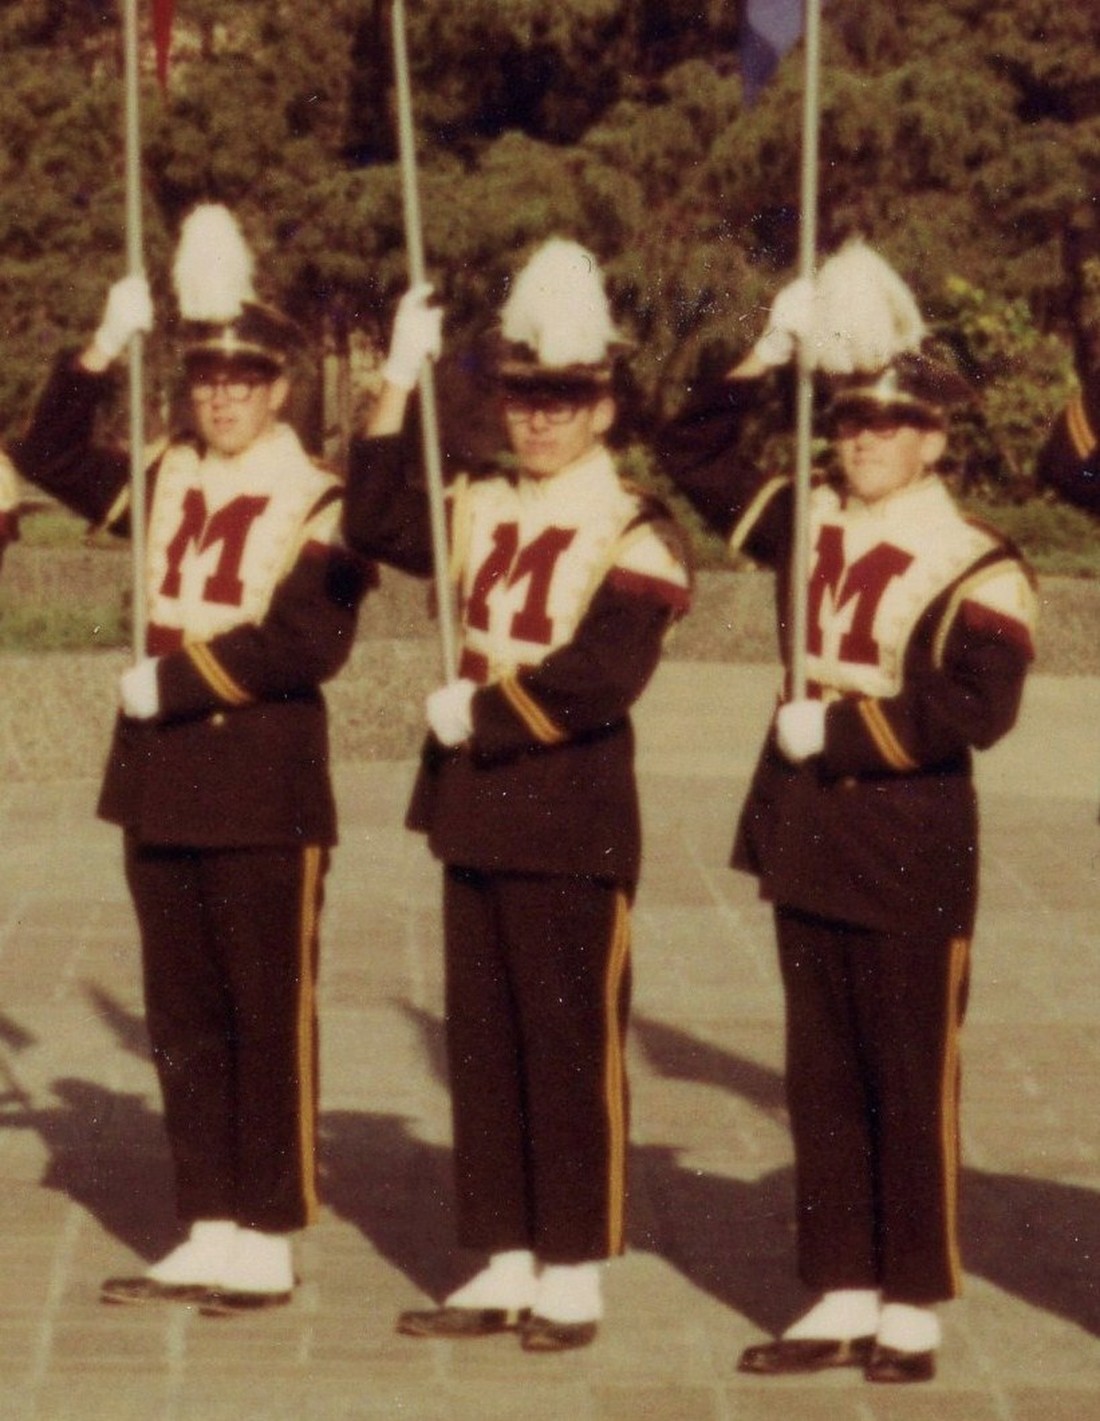 Band members in the 1960s